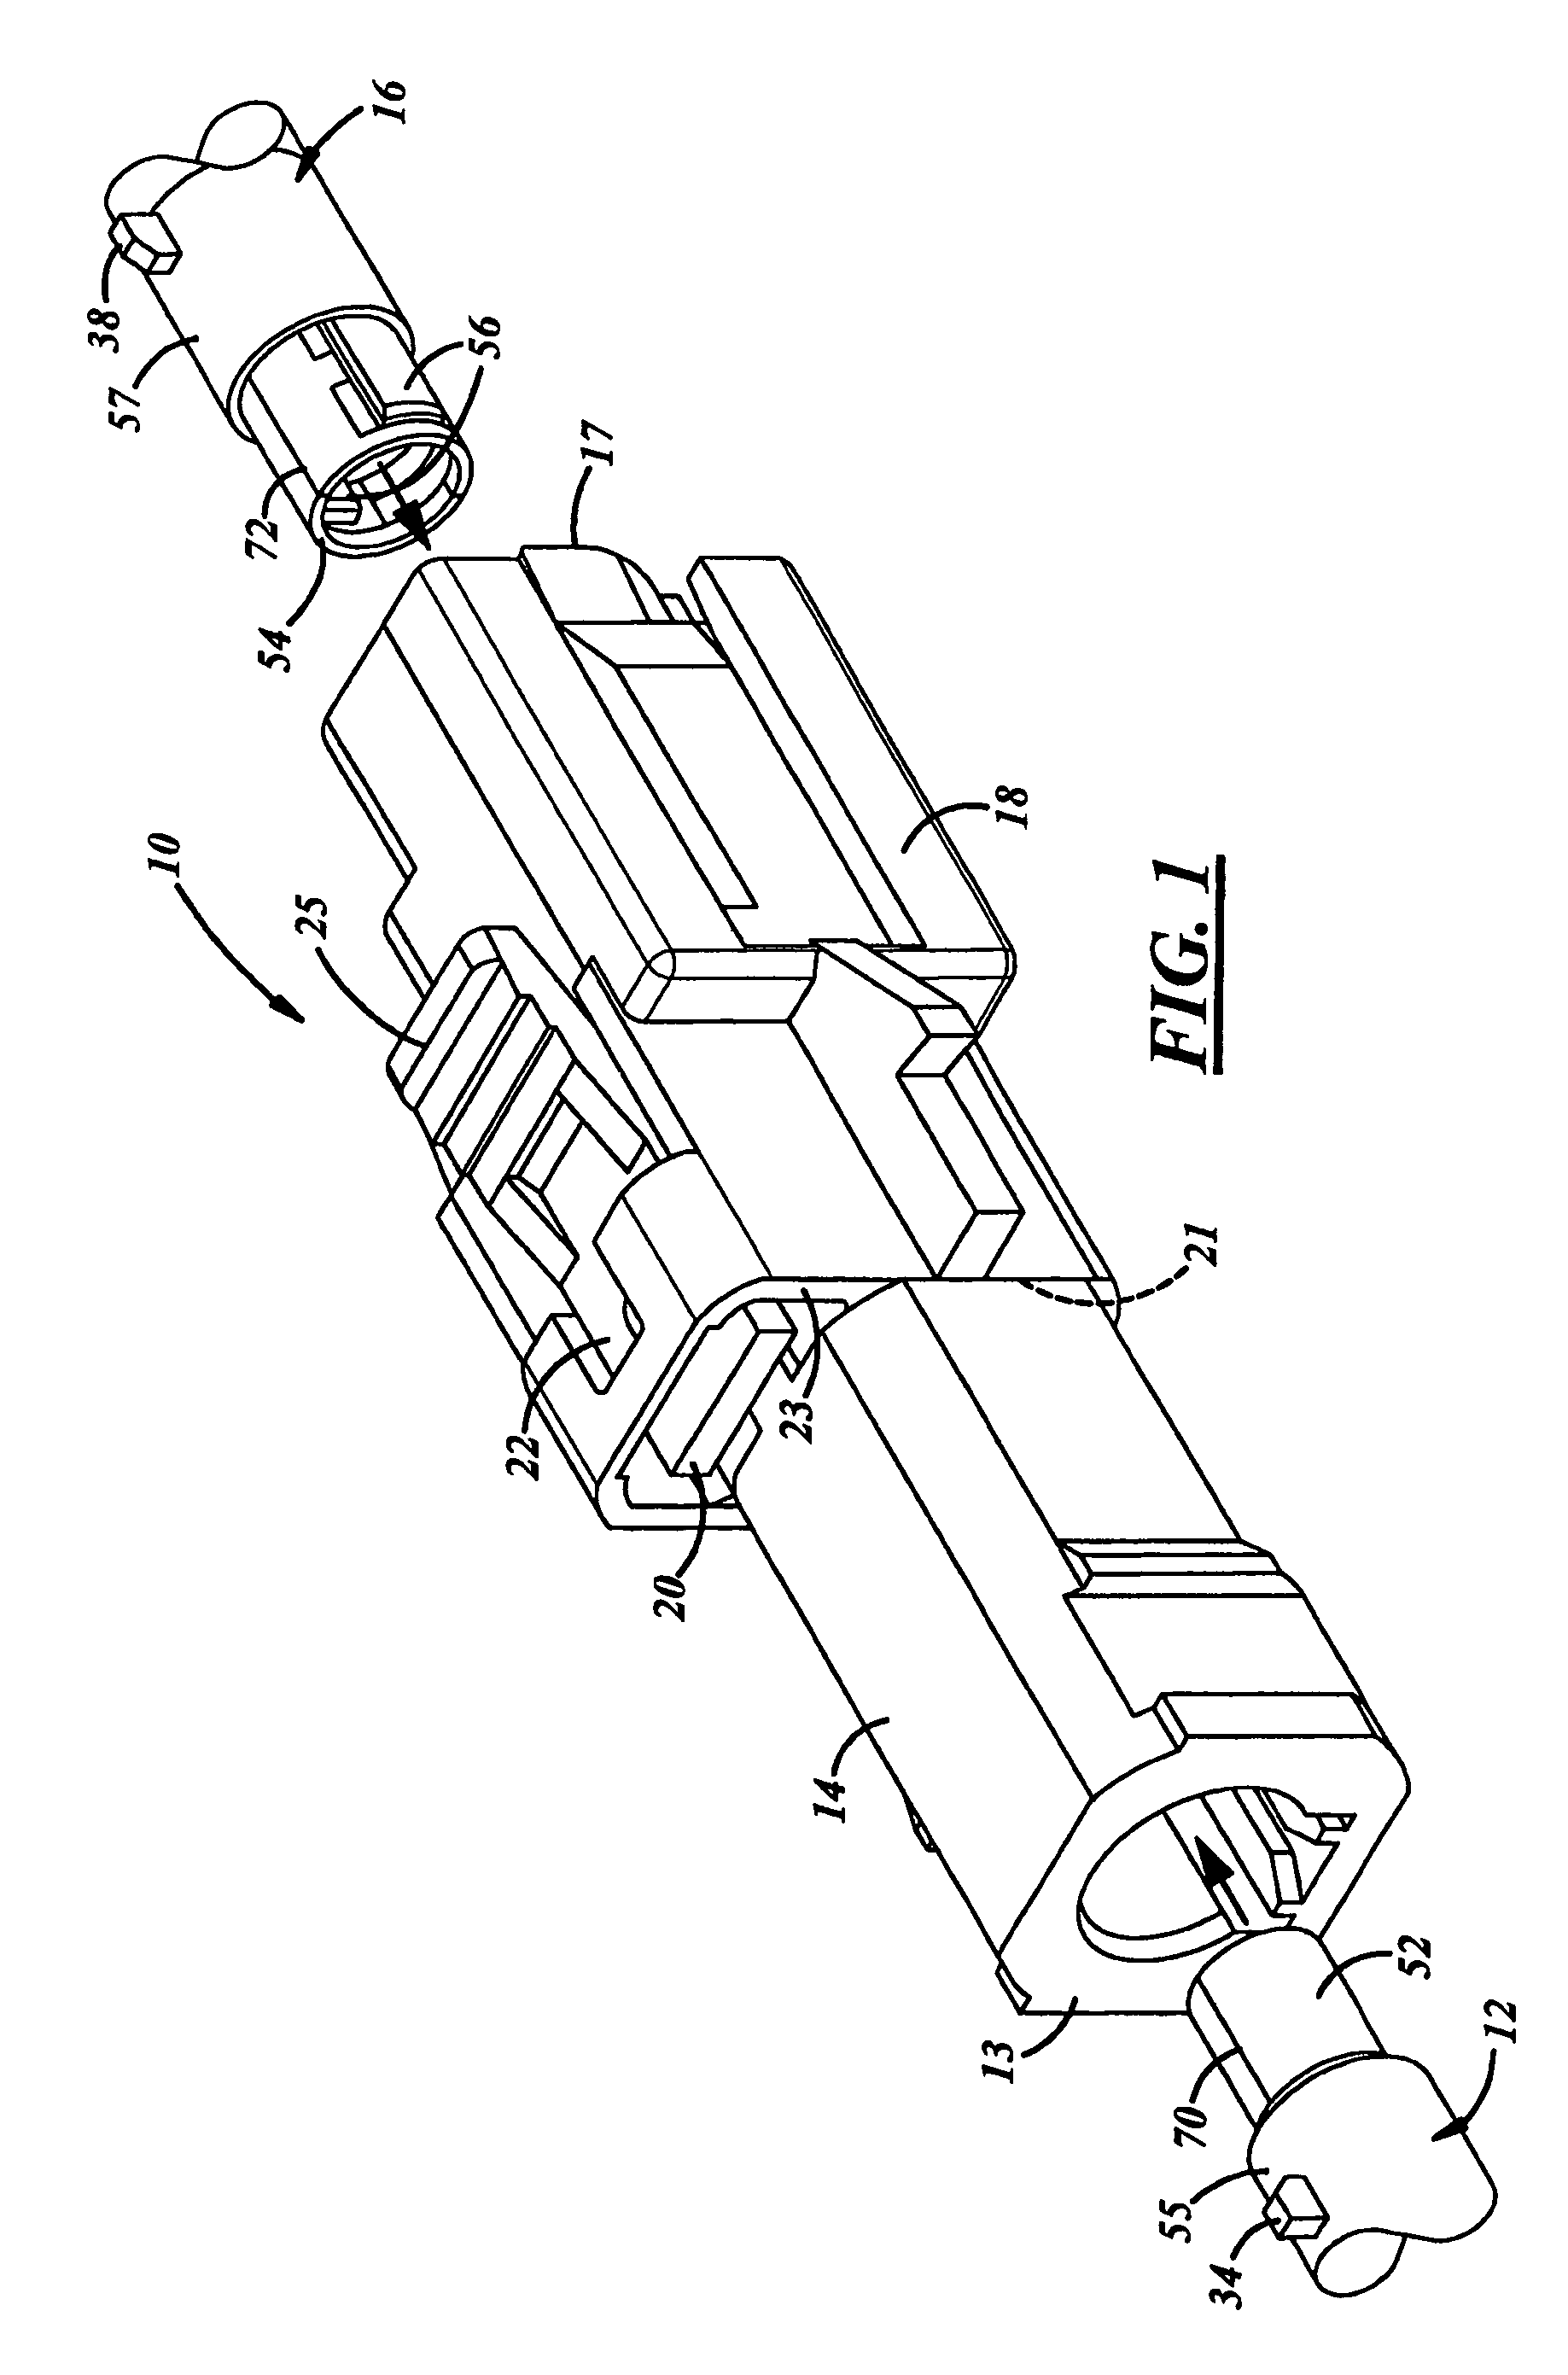 RF connector with integrated shield